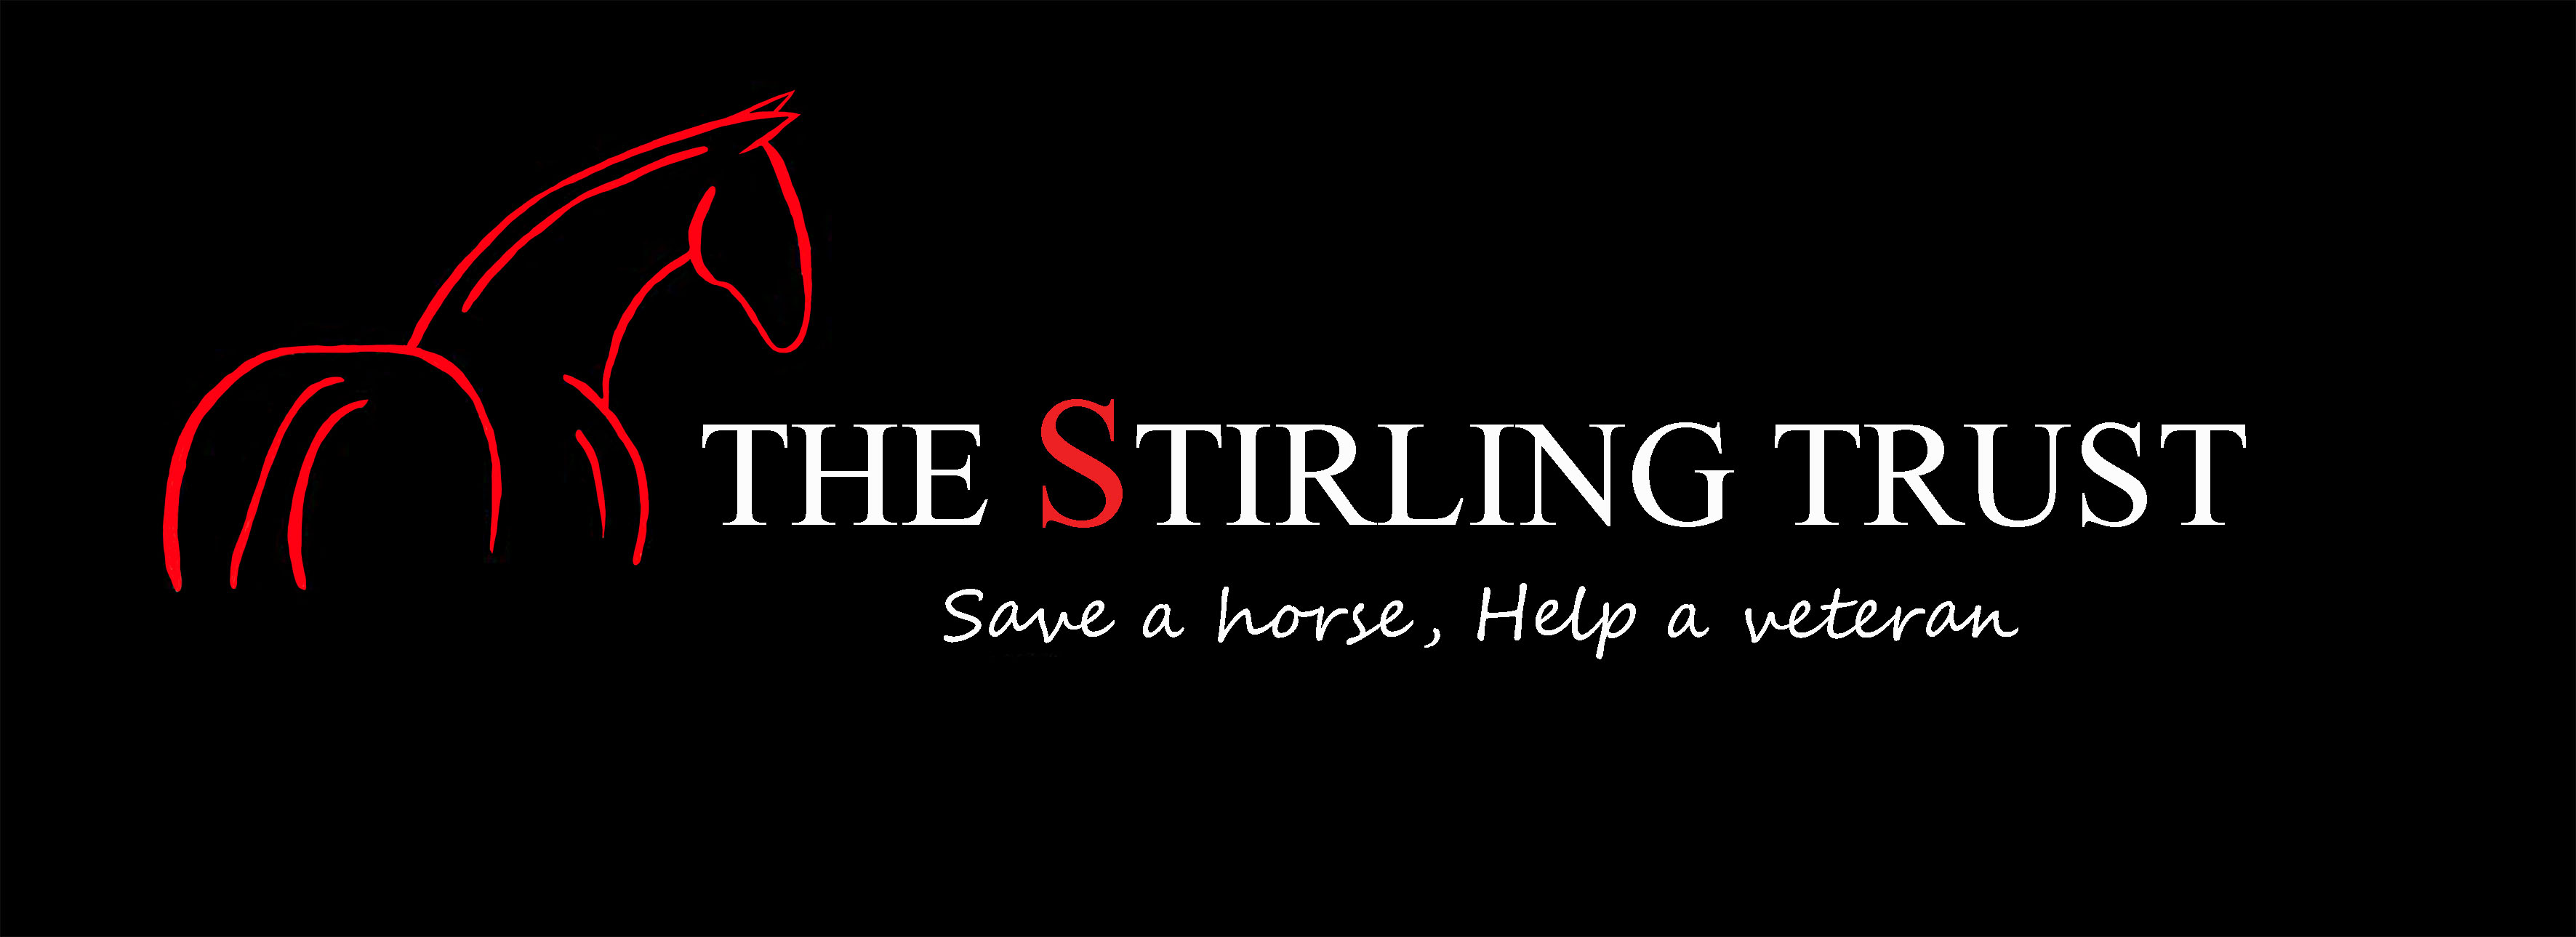 The Stirling Trust